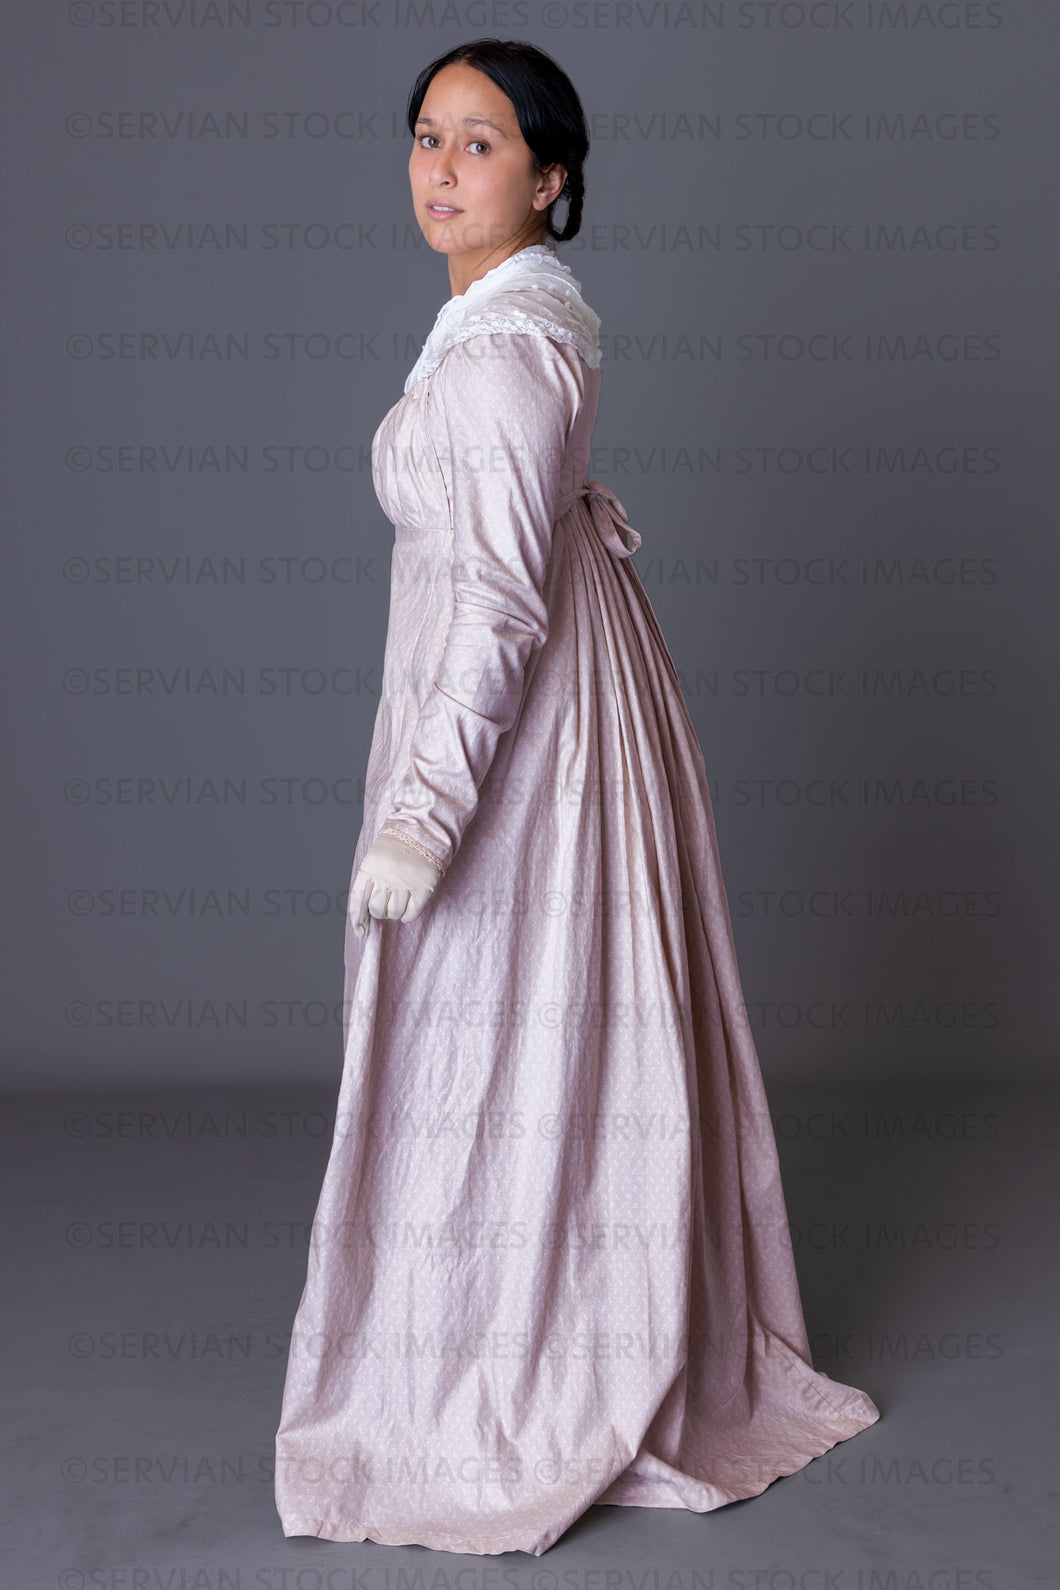 Regency woman wearing a cotton dress with a lace modesty shawl (Sylvia 5949)